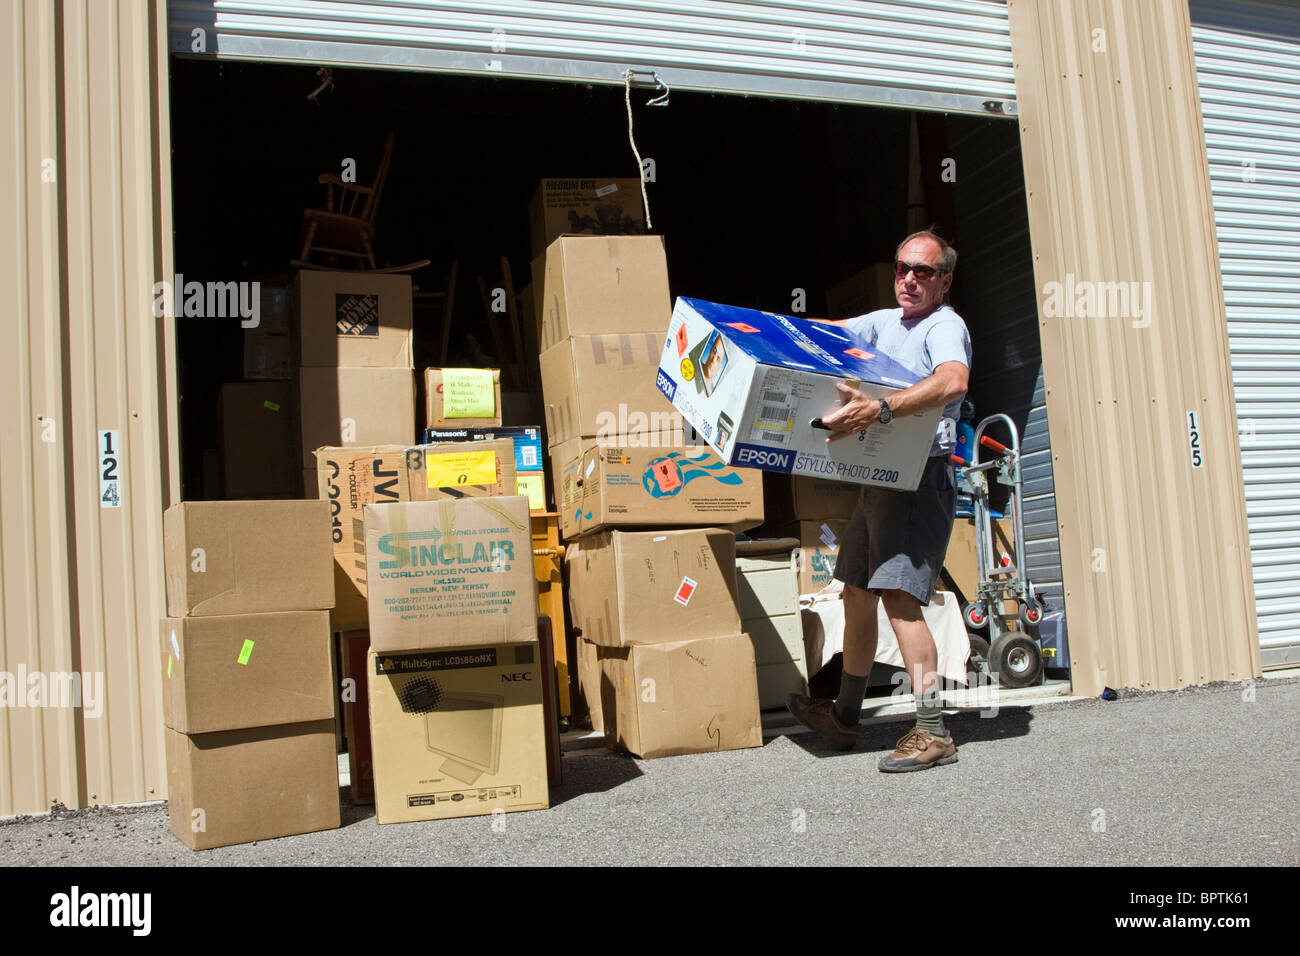 Man removing boxes of belongings from a self storage space. Stock Photo